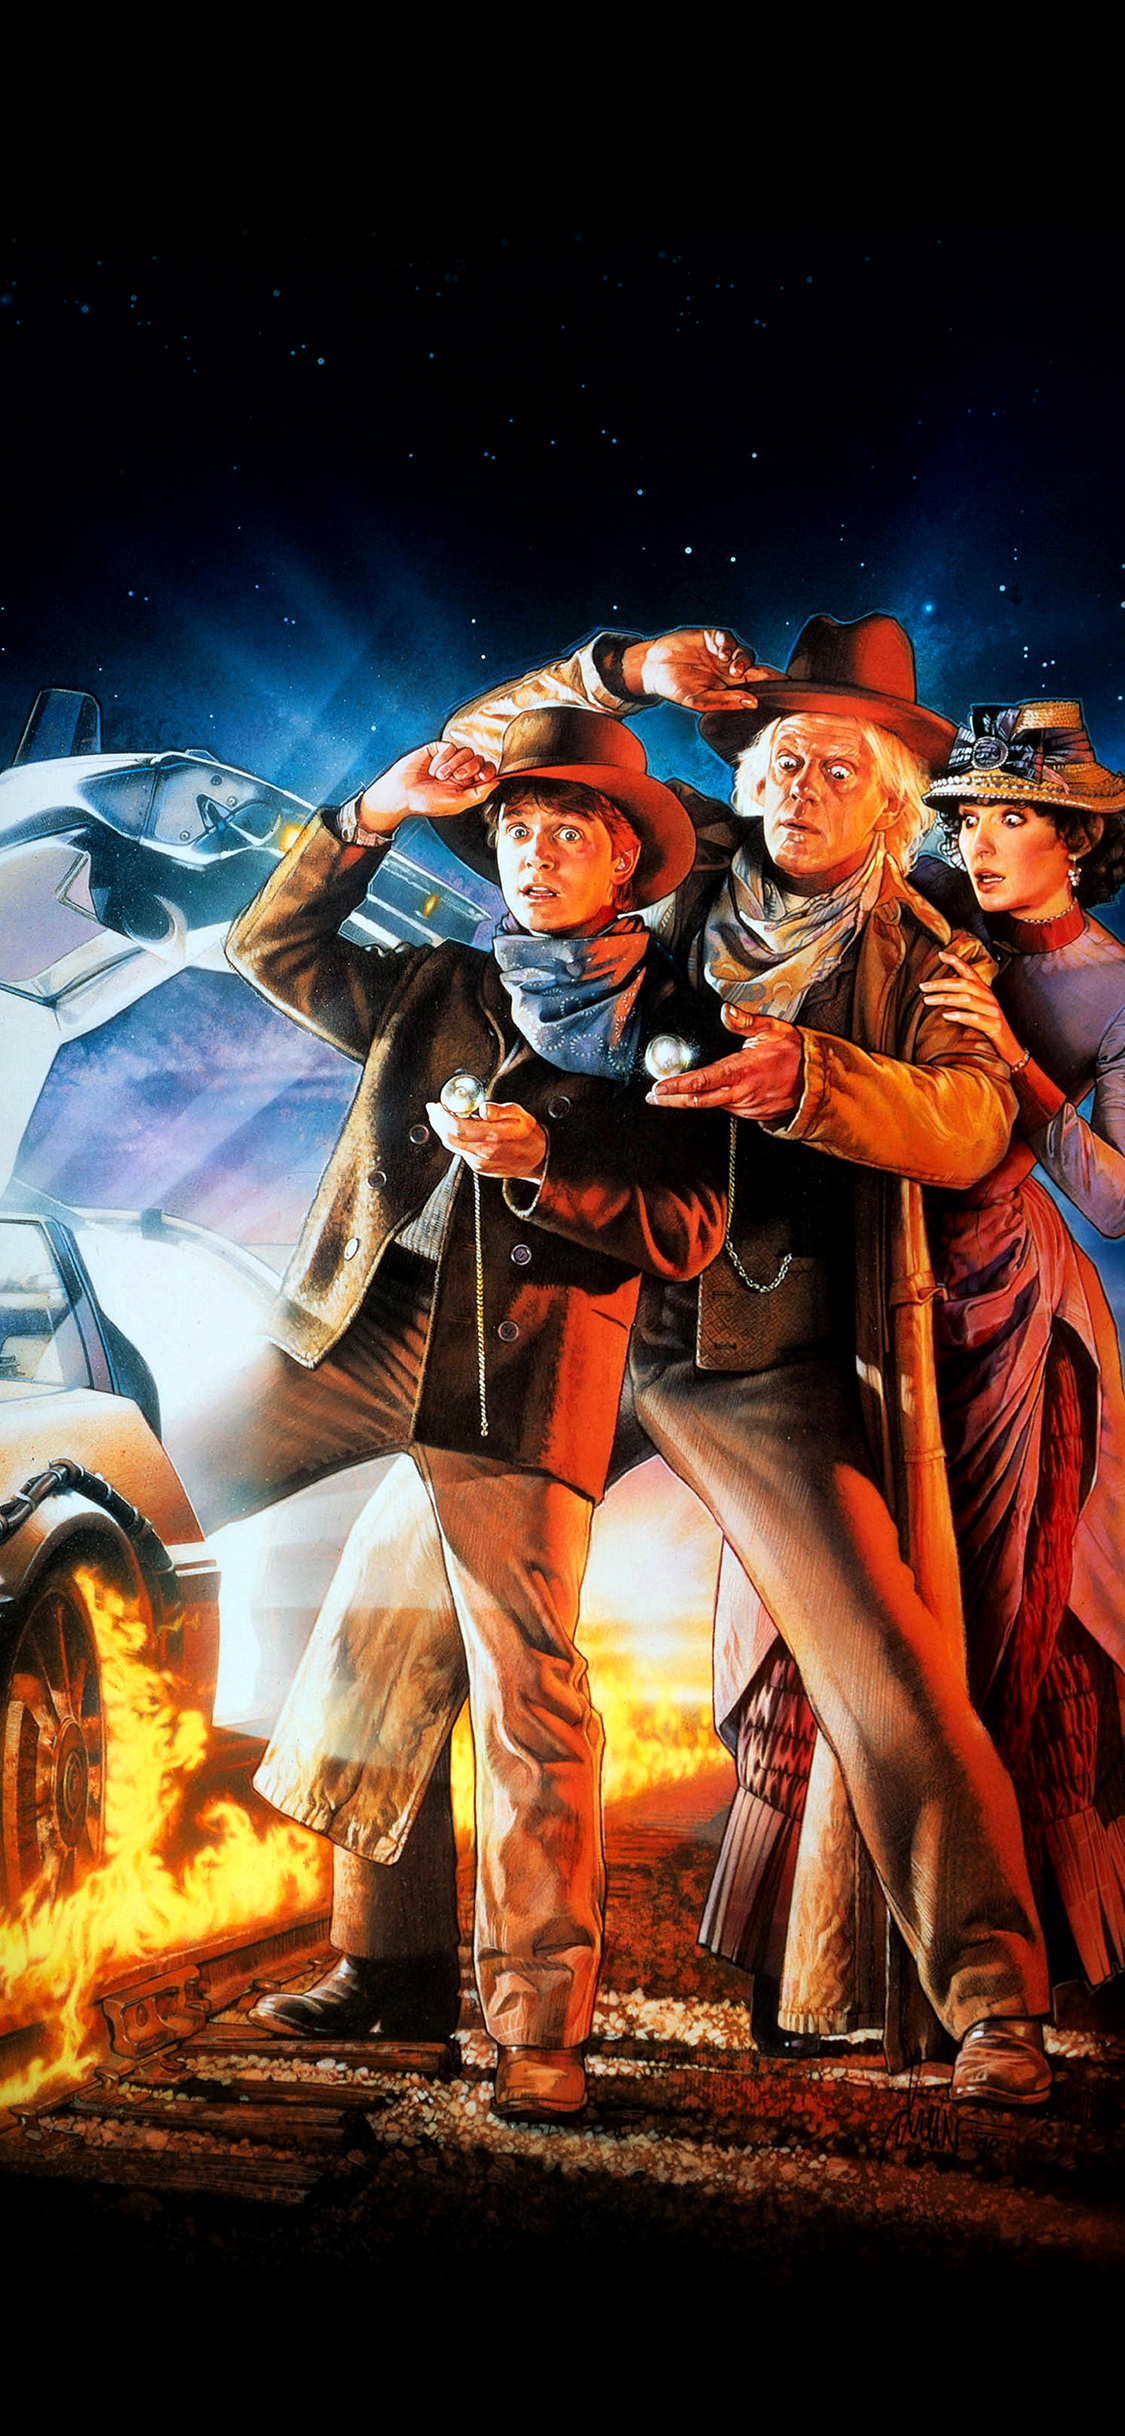 back to the future 3 poster film art